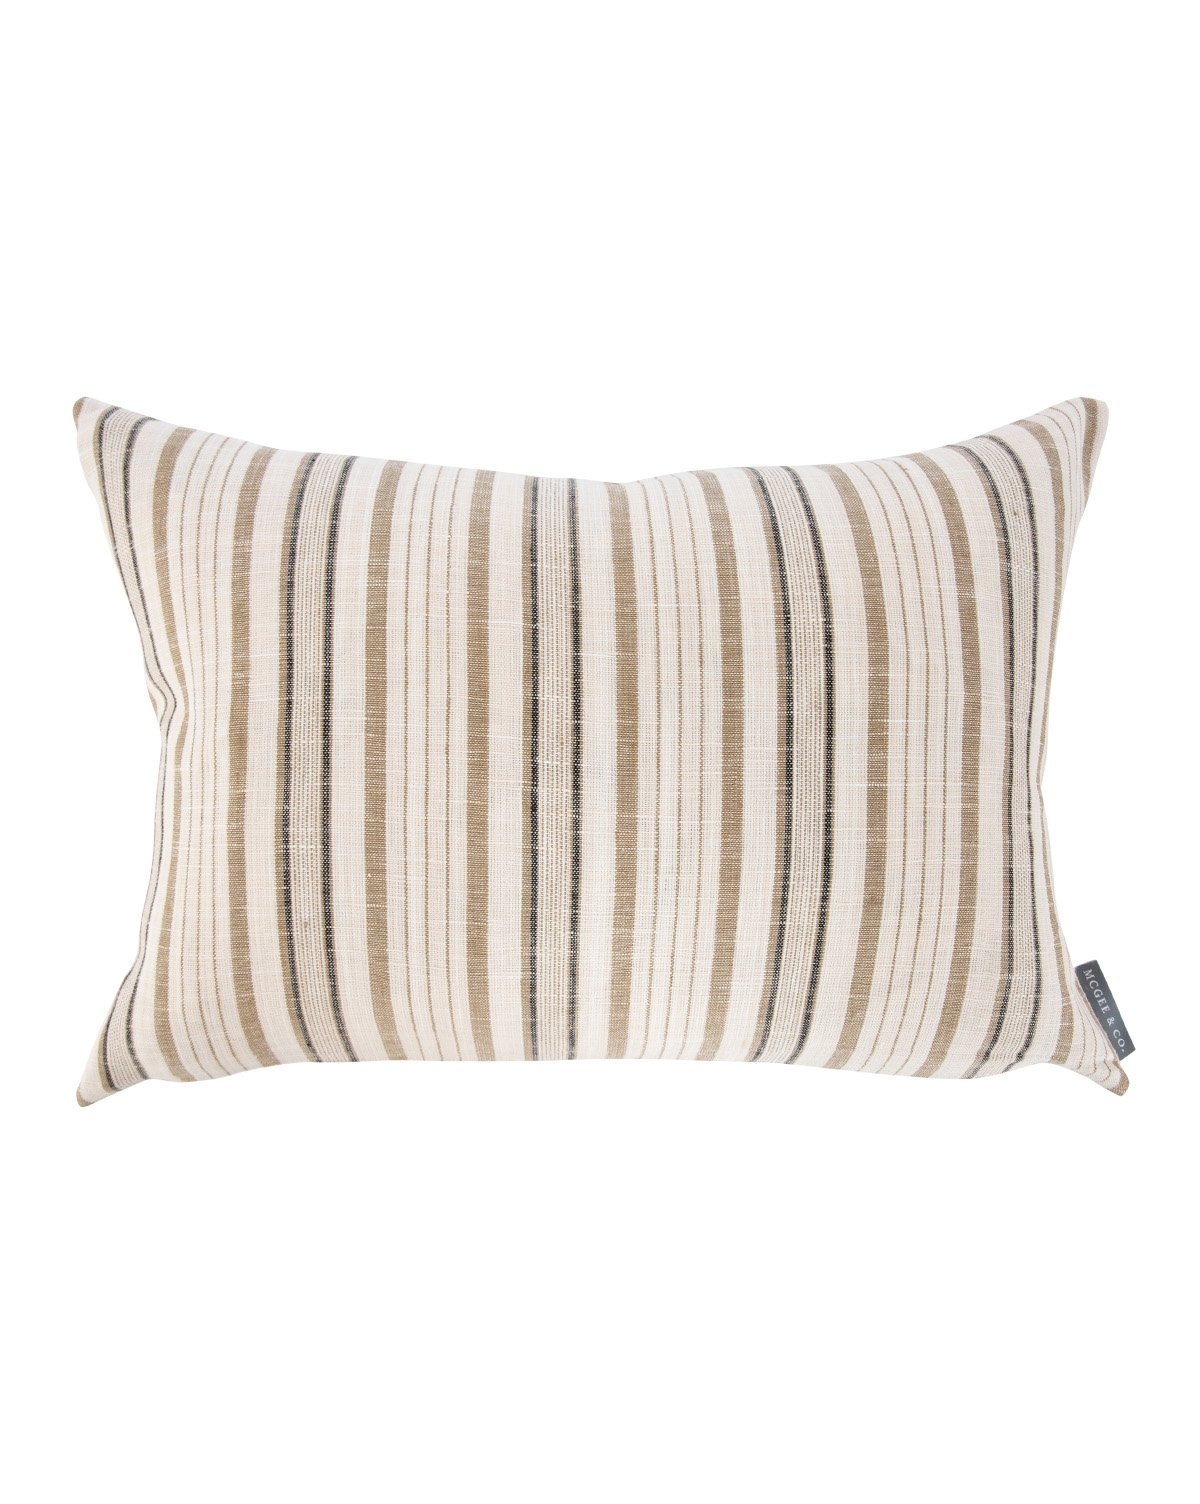 ARCHIE PILLOW WITHOUT INSERT, CAMEL, 12" x 24" - Image 0